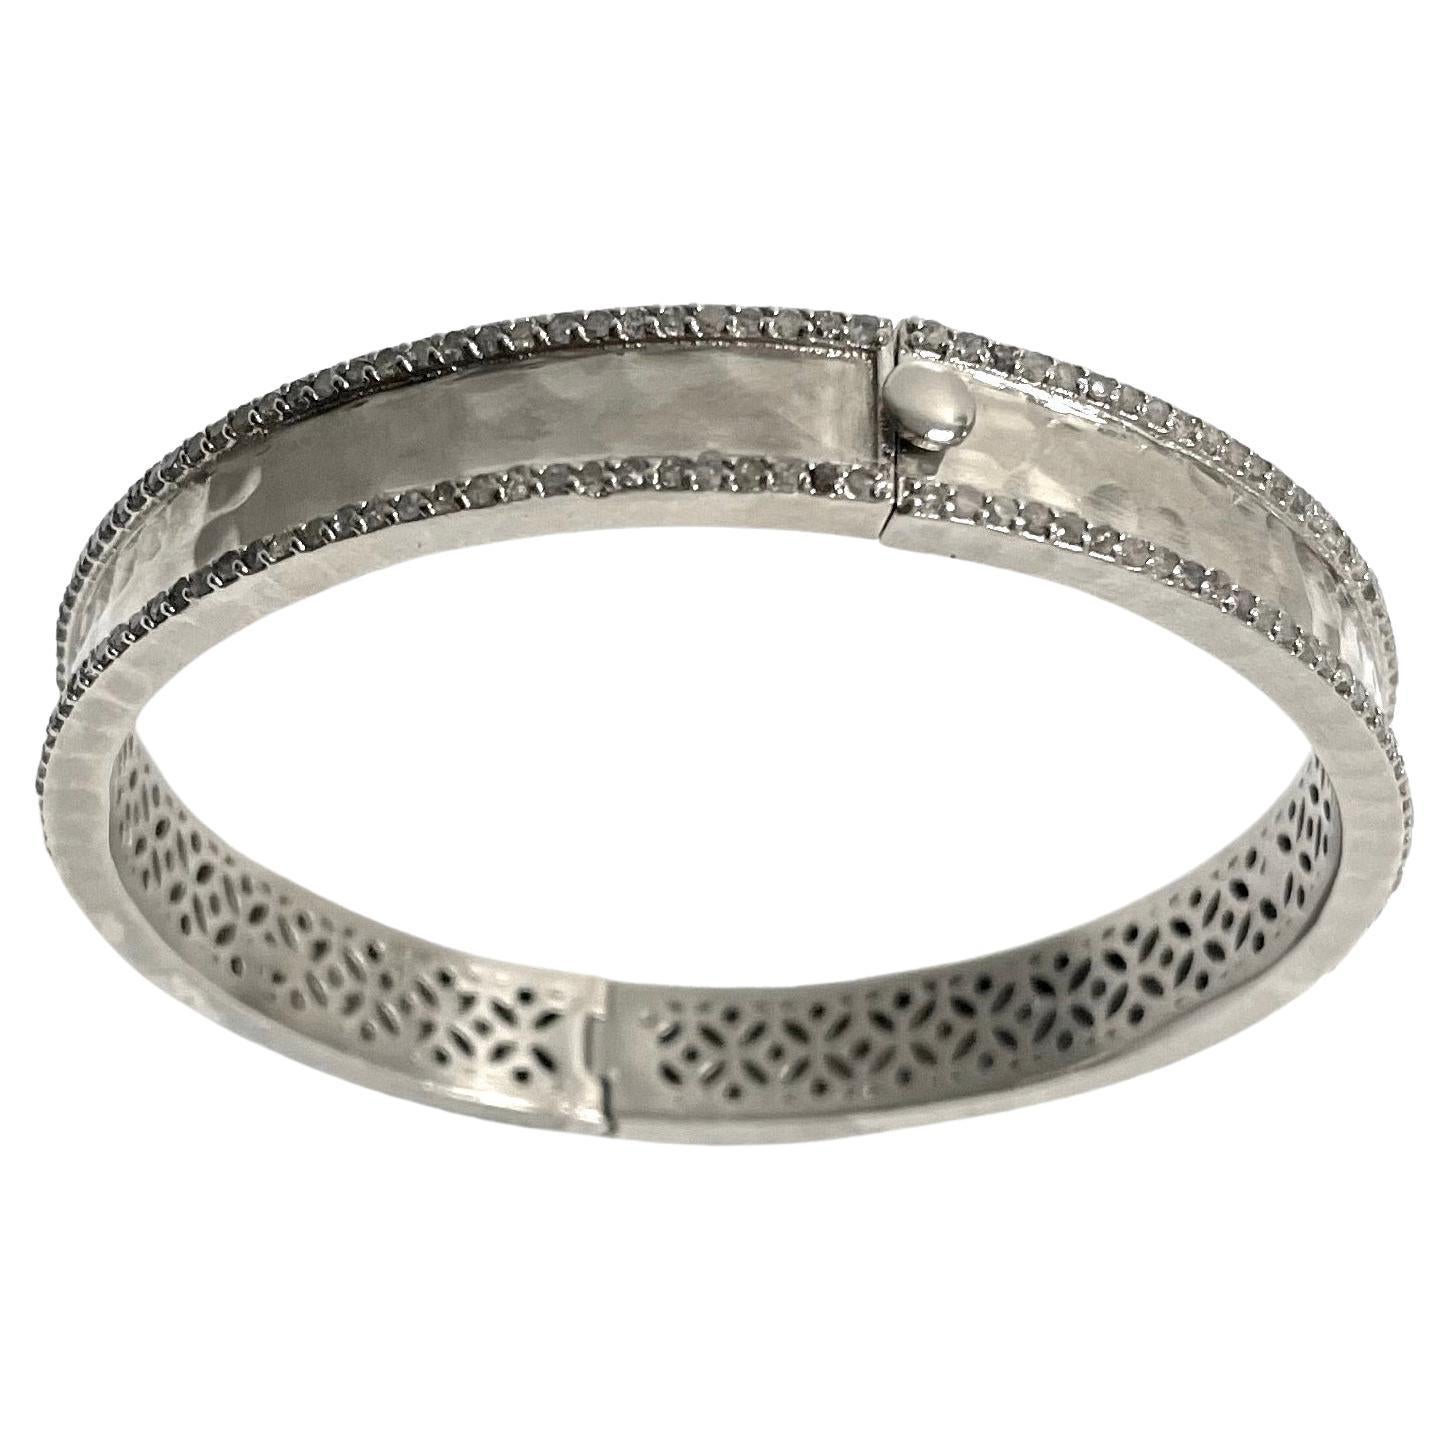  Hammered Rhodium-Plated Silver Bangle with Diamonds Paradizia Bracelet For Sale 12